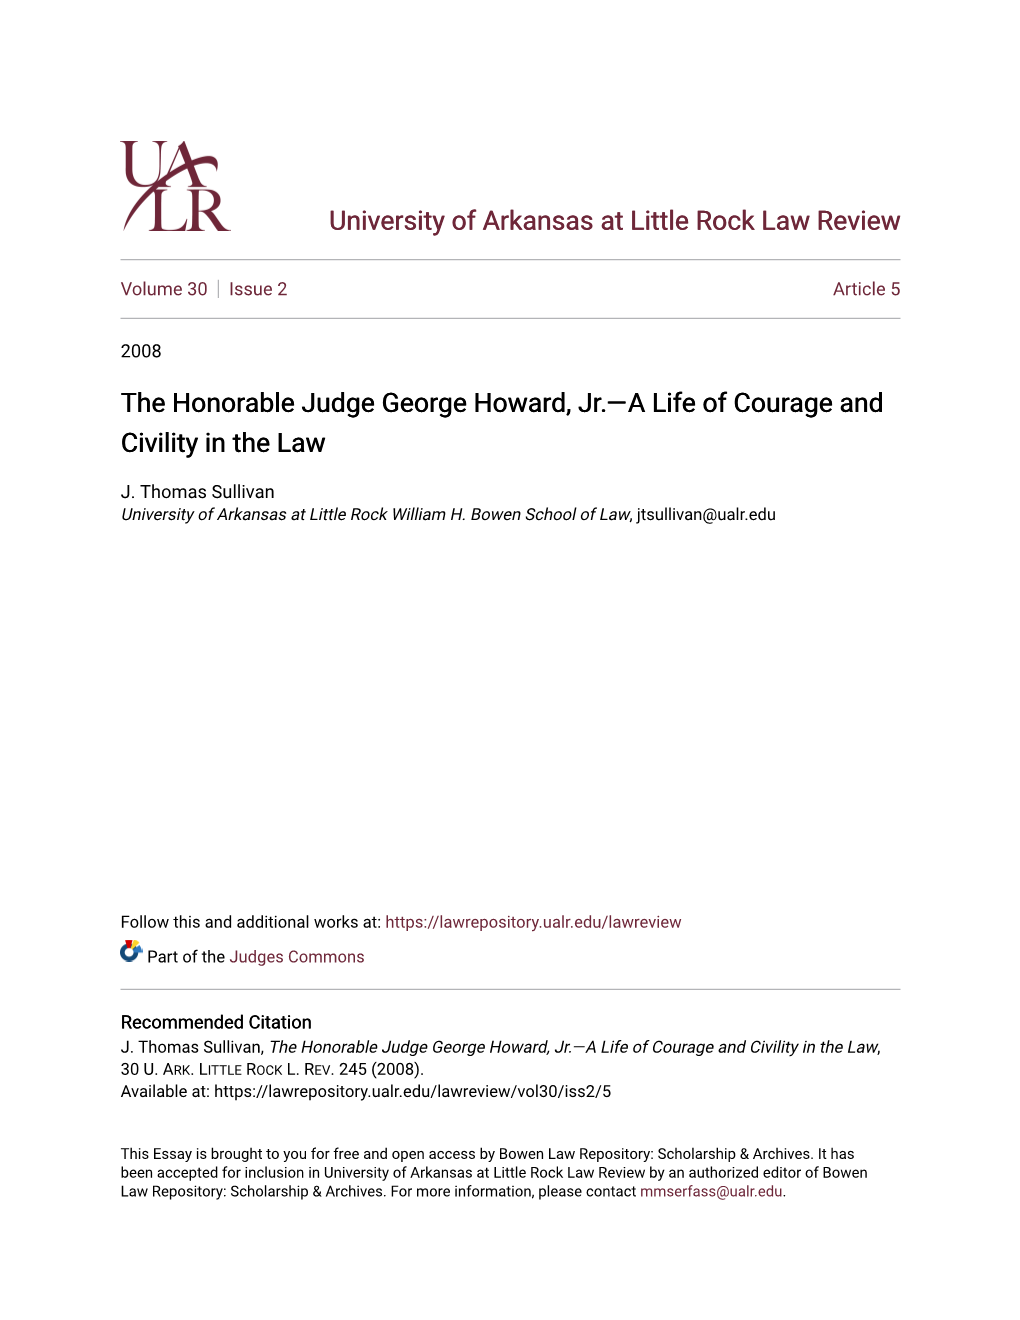 The Honorable Judge George Howard, Jr.—A Life of Courage and Civility in the Law